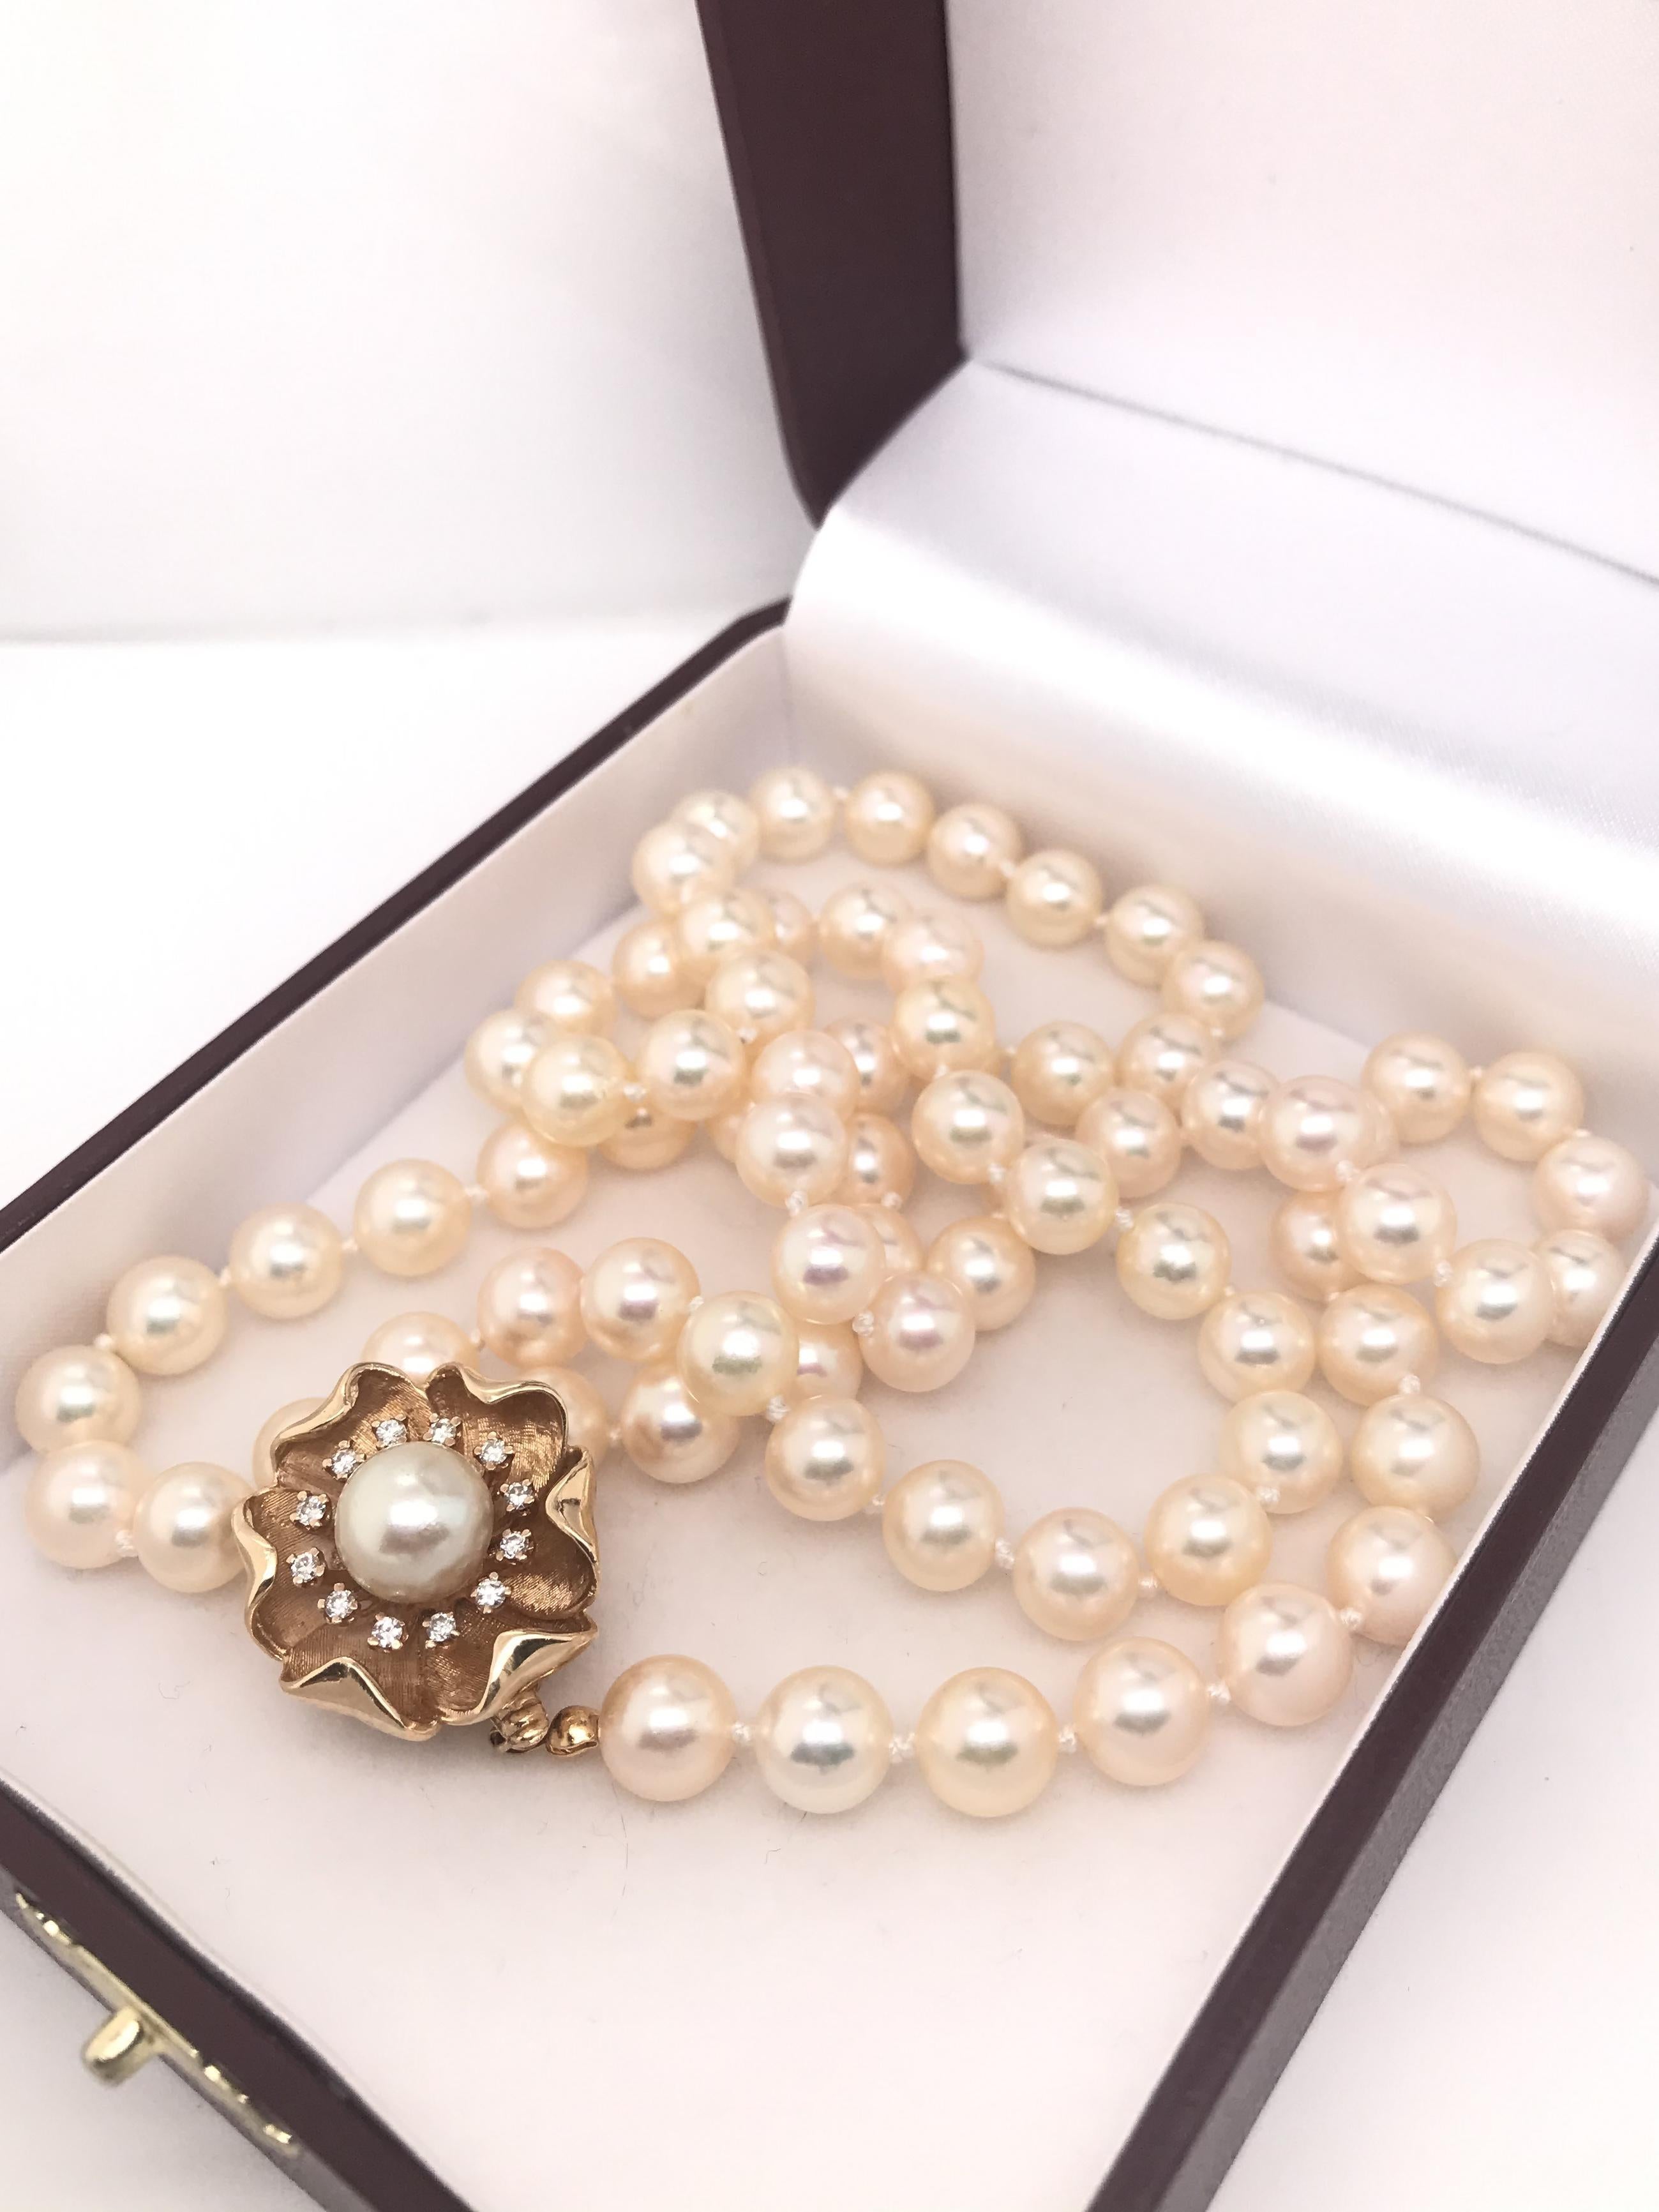 Women's Vintage Mid Century 7.5 Mm Pearl Necklace With Floral Diamond Clasp For Sale